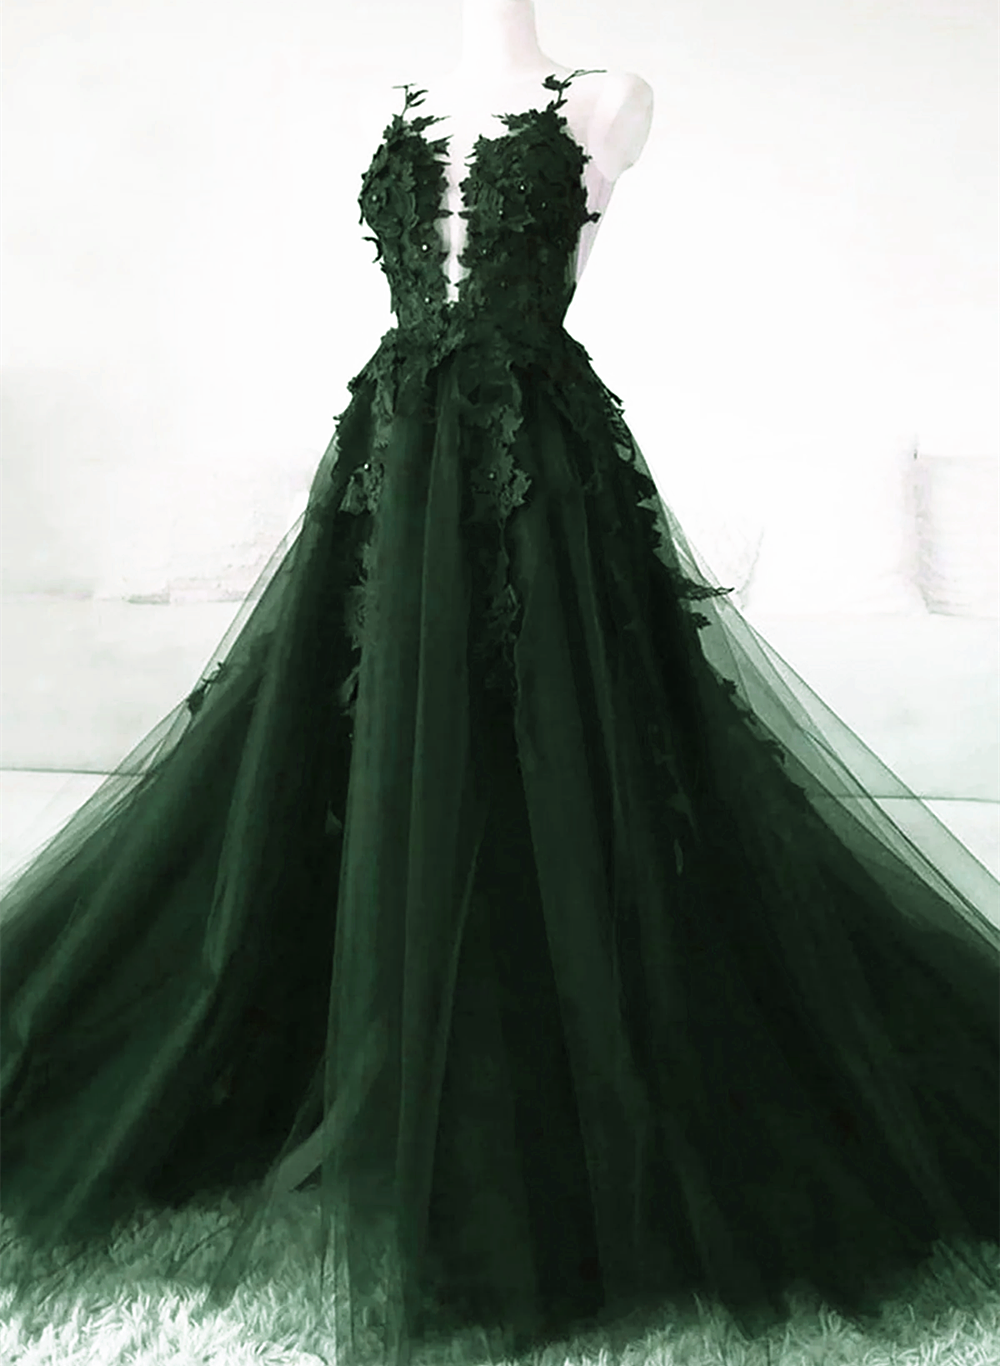 Green A-Line Tulle With Lace Low Back Corset Prom Dress, Green Tulle Evening Dress Party Dress Outfits, Black Tie Dress